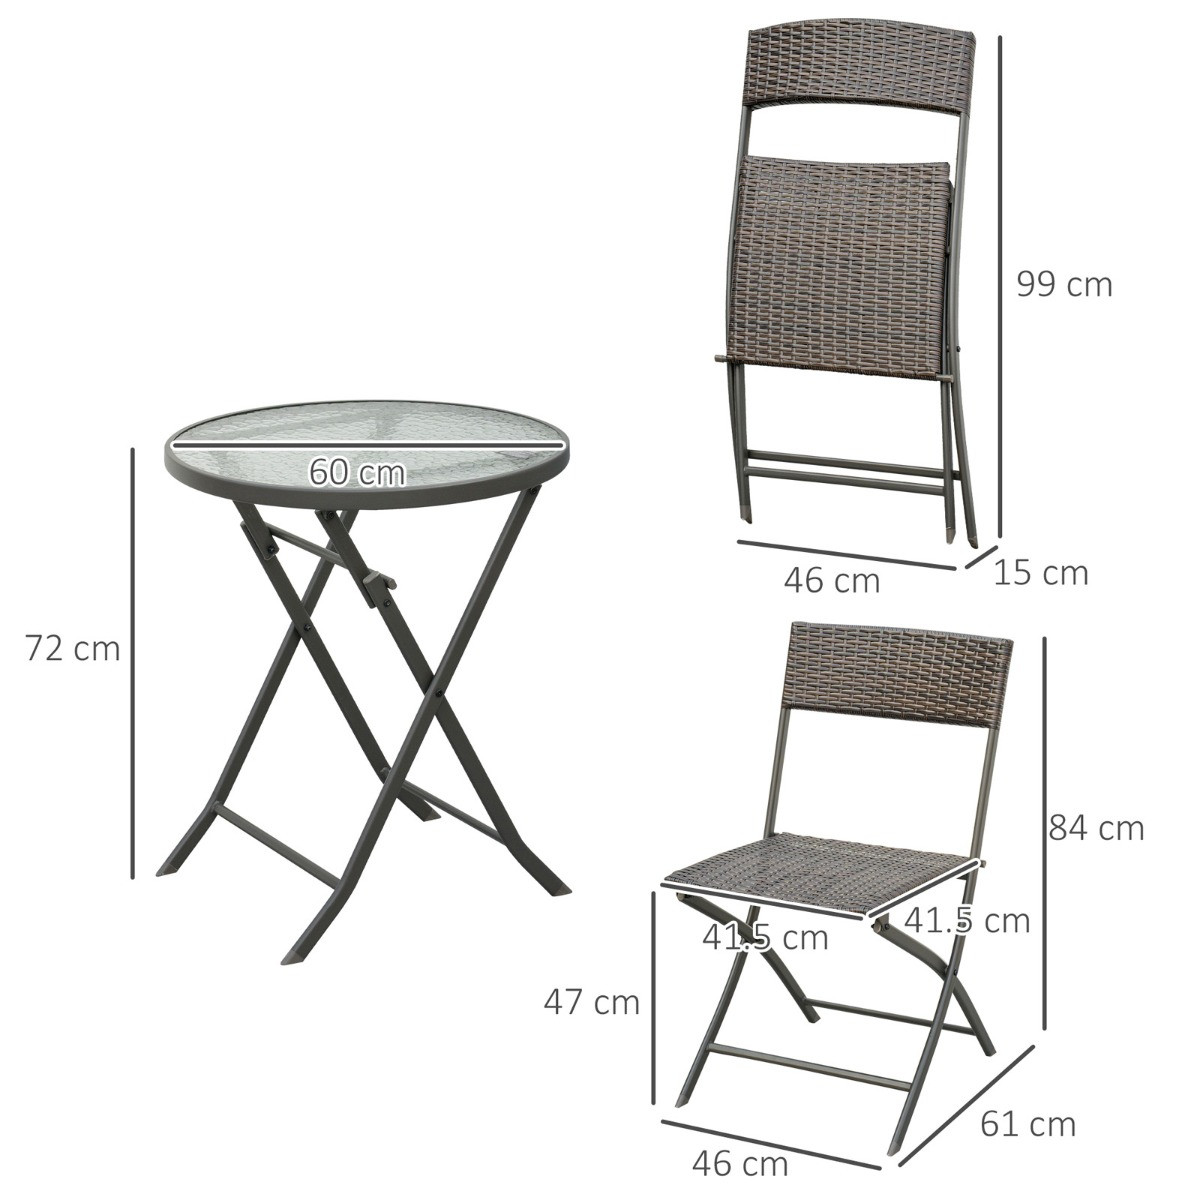 Outsunny Rattan Wicker Bistro Table And Chair Set, Brown - 3 Piece>